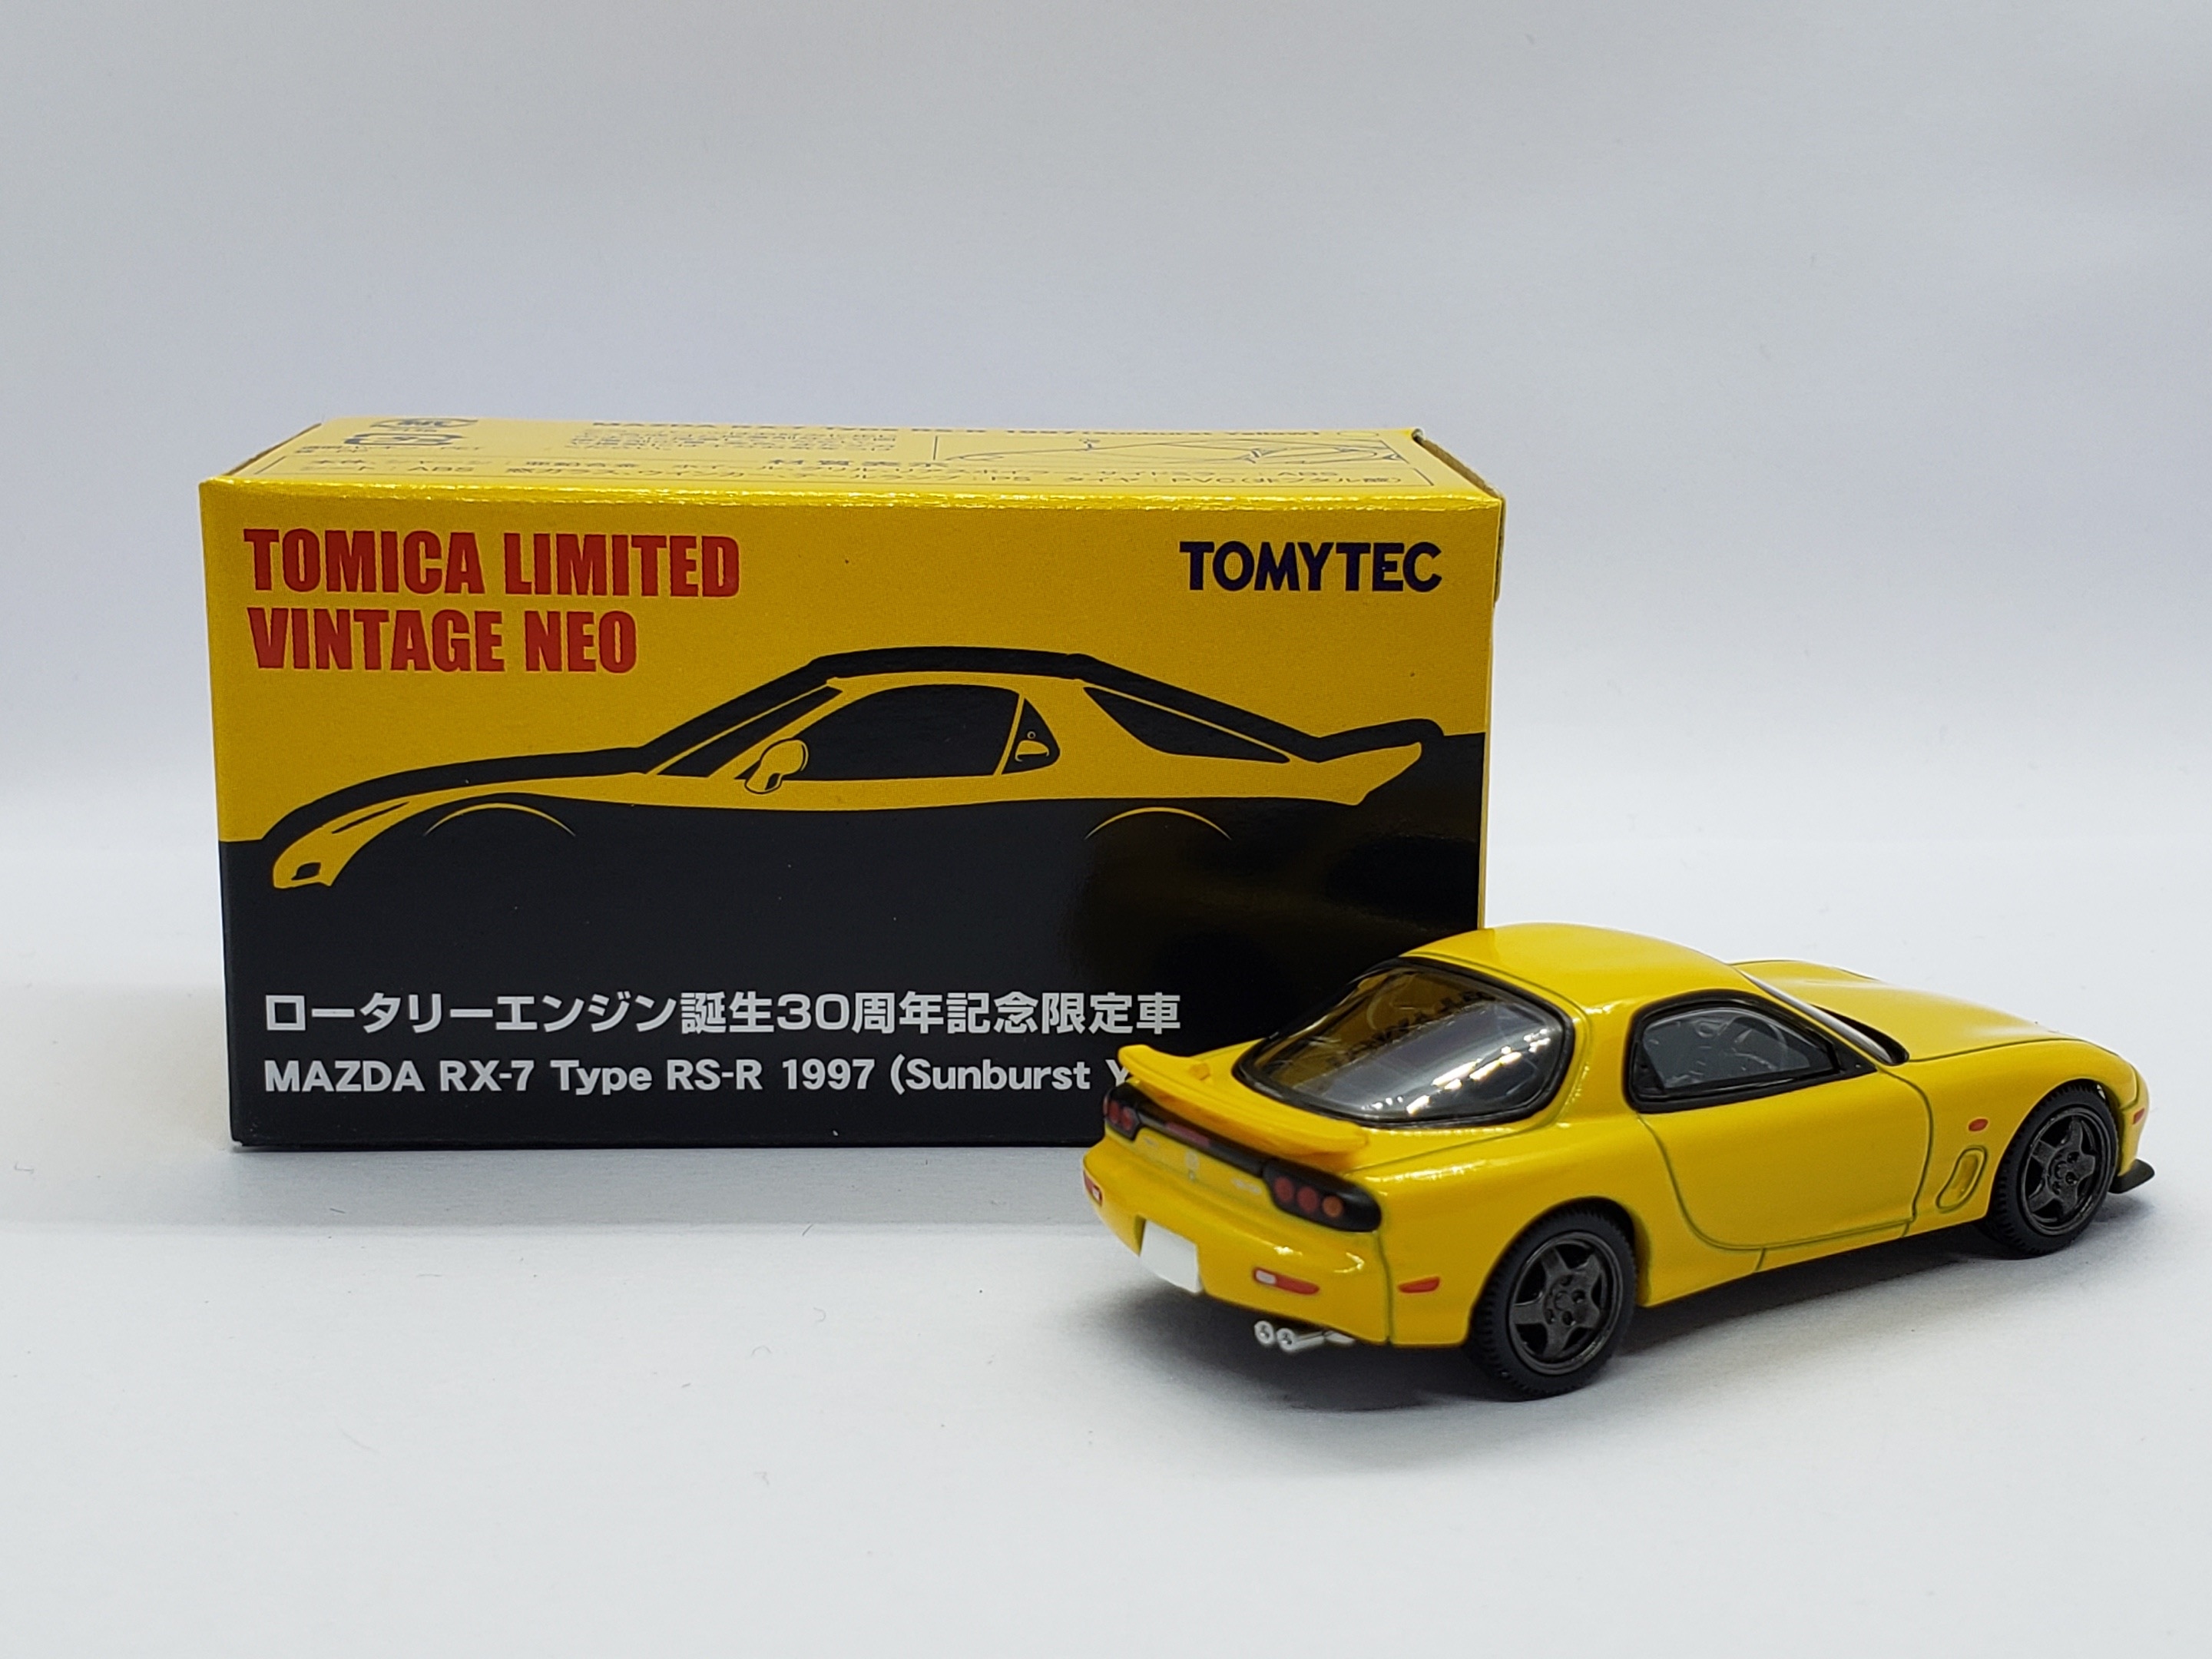 Tomytec TLV-Mazda RX-7 Type RS-R 97 SUN. YL. (Exclusive